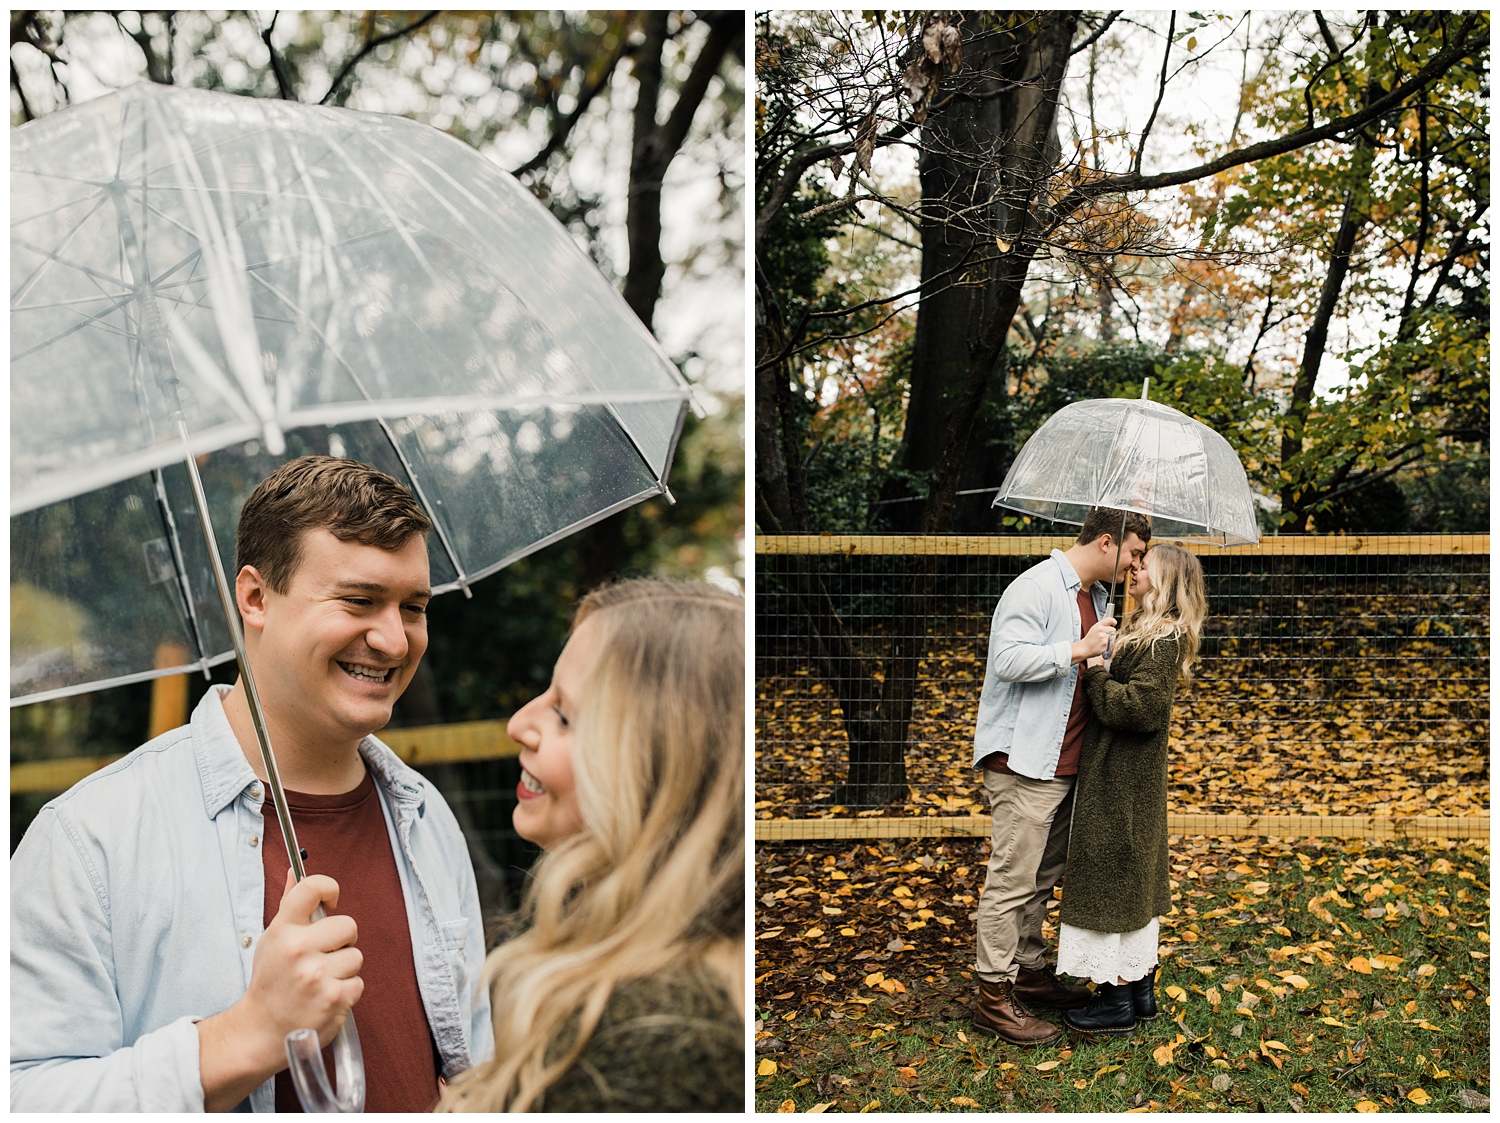 Rainy Day Engagement Session in Marietta, Georgia with cute couple under clear umbrella